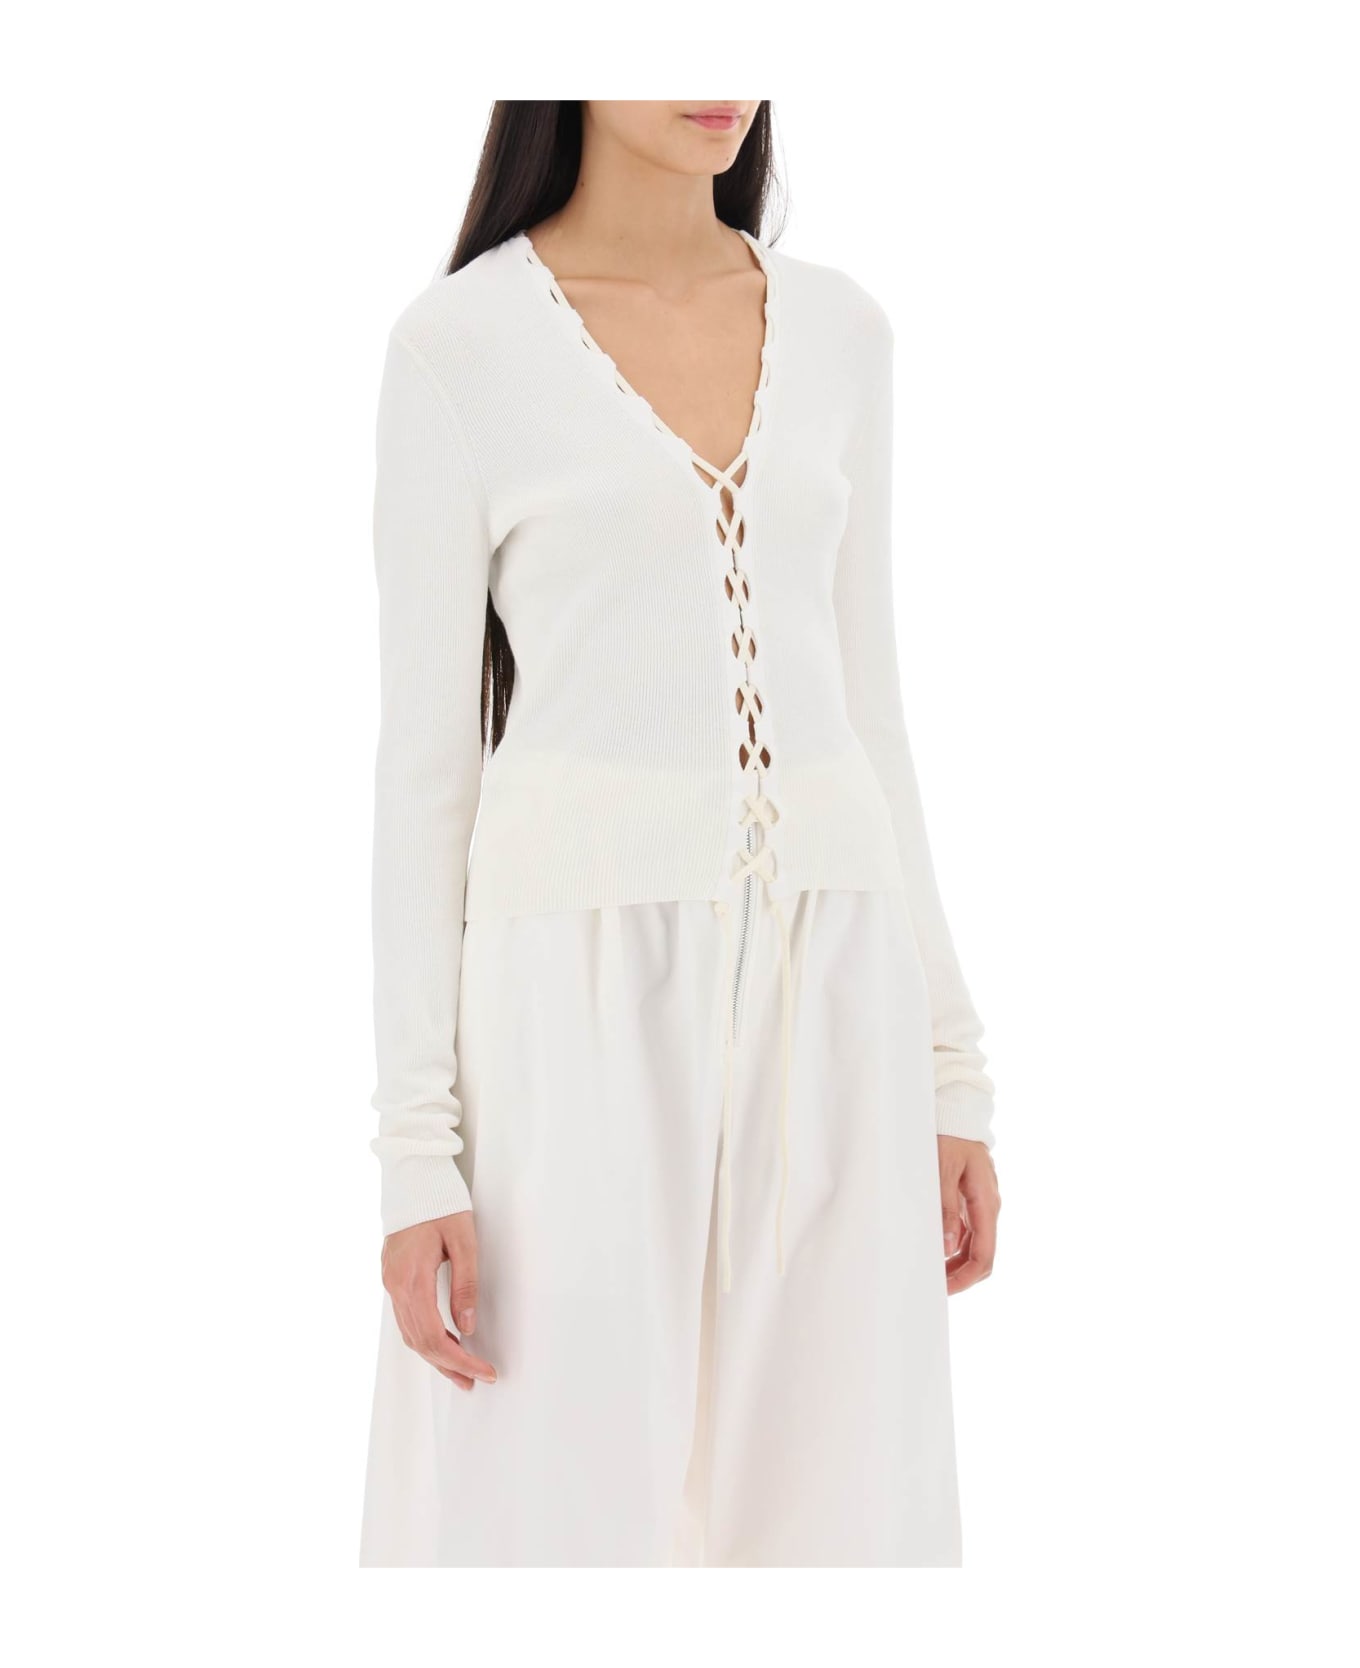 Dion Lee Lace-up Cardigan - WHITE CREAM (White)